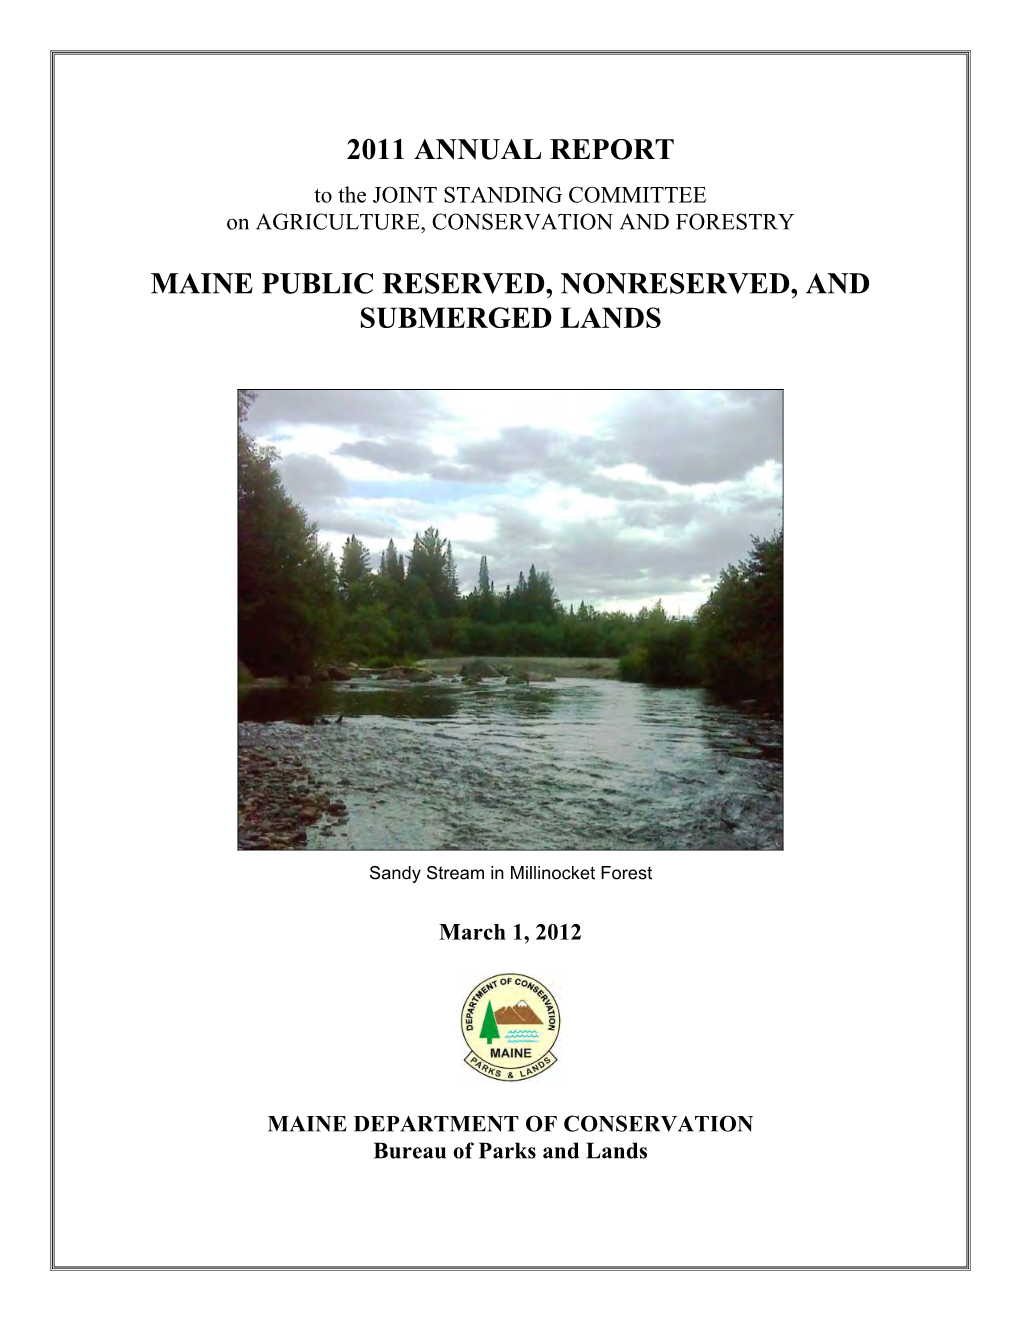 2011 Annual Report Maine Public Reserved